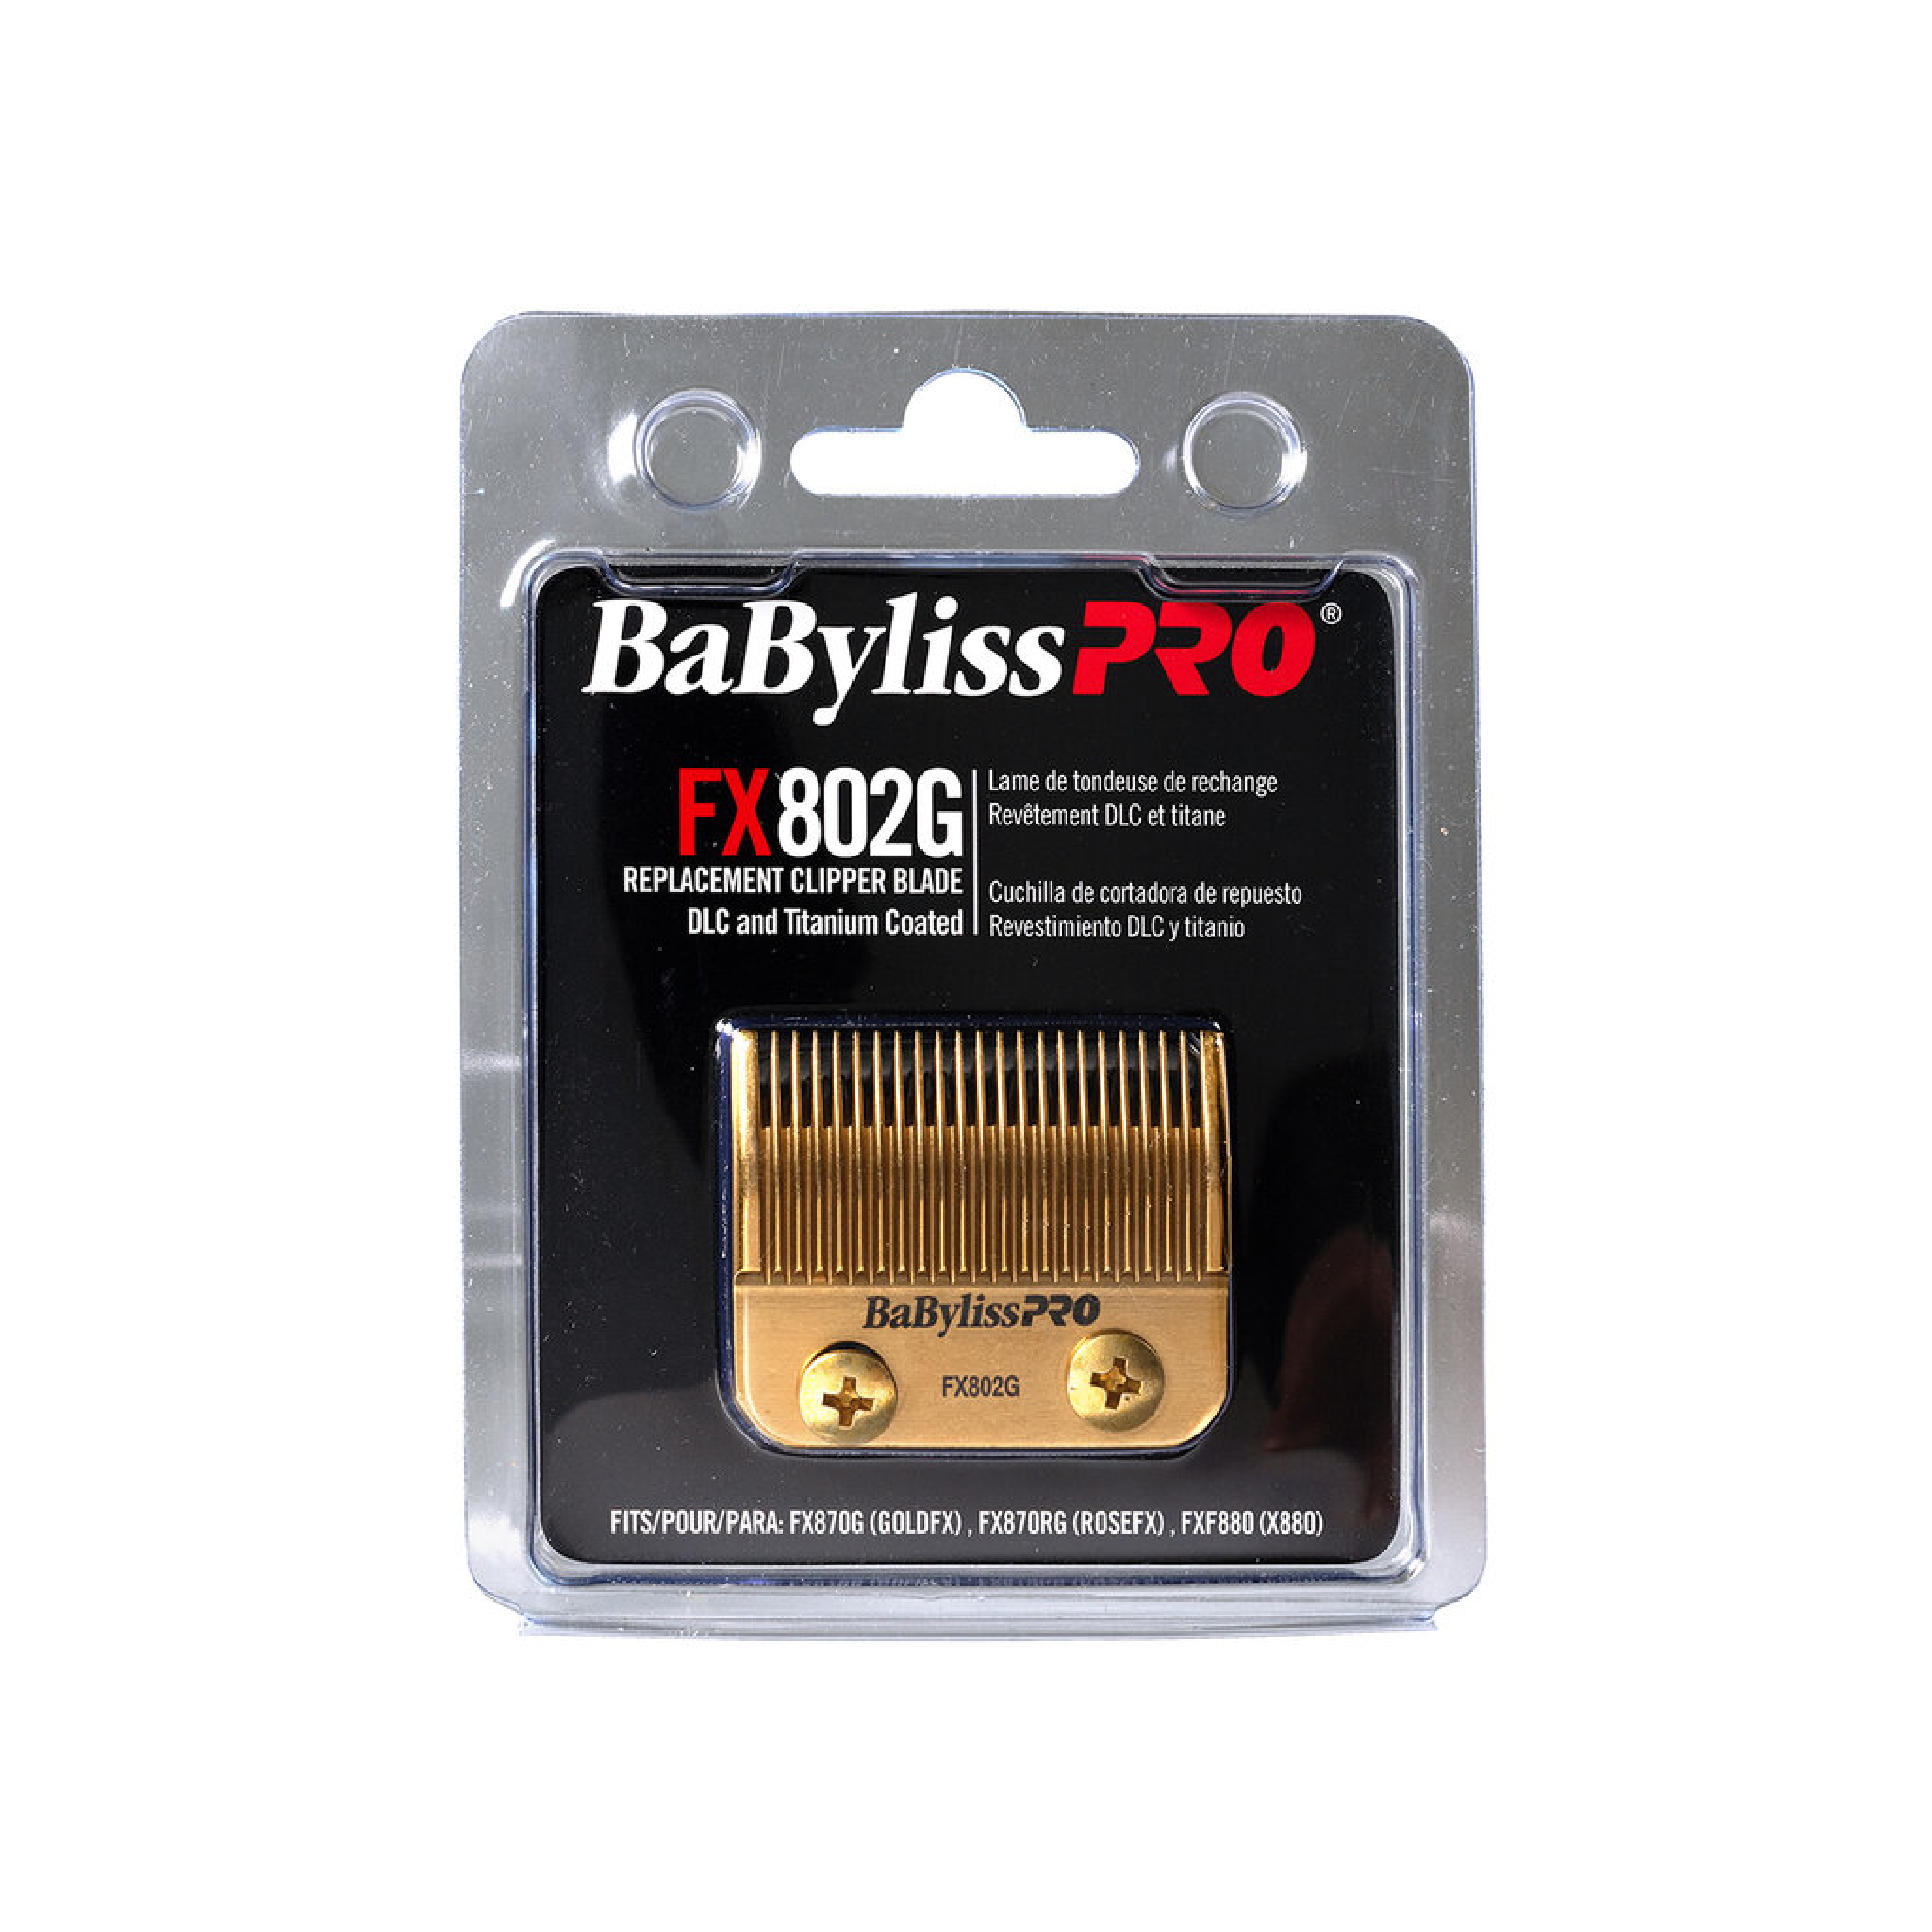 Babyliss Pro DLC And Titanium Coated Gold Replacement Clipper Blade - FX802G